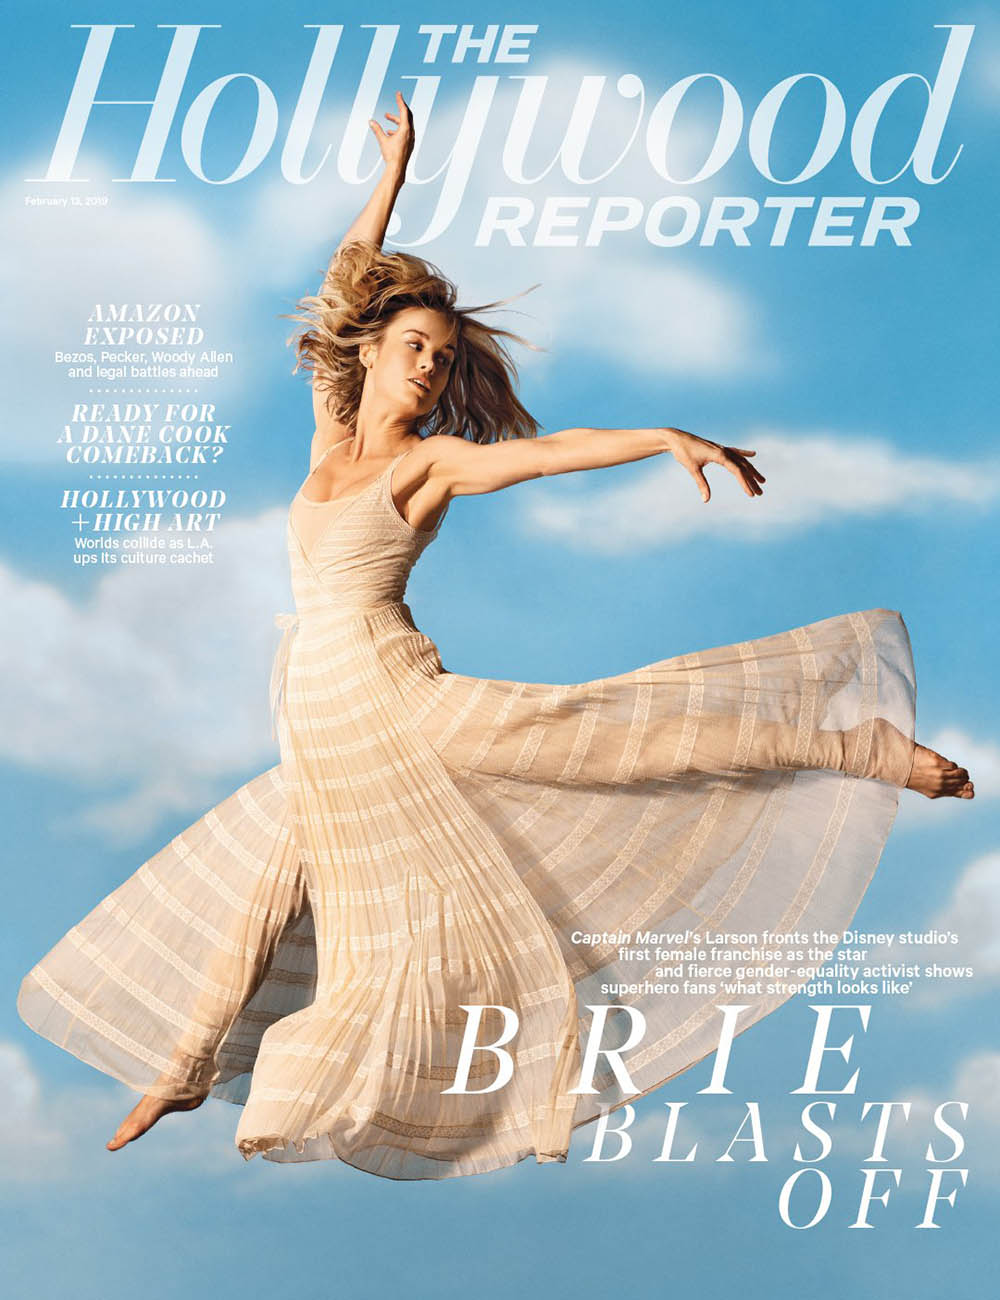 Brie Larson covers The Hollywood Reporter February 13th, 2019 by Dana Scruggs